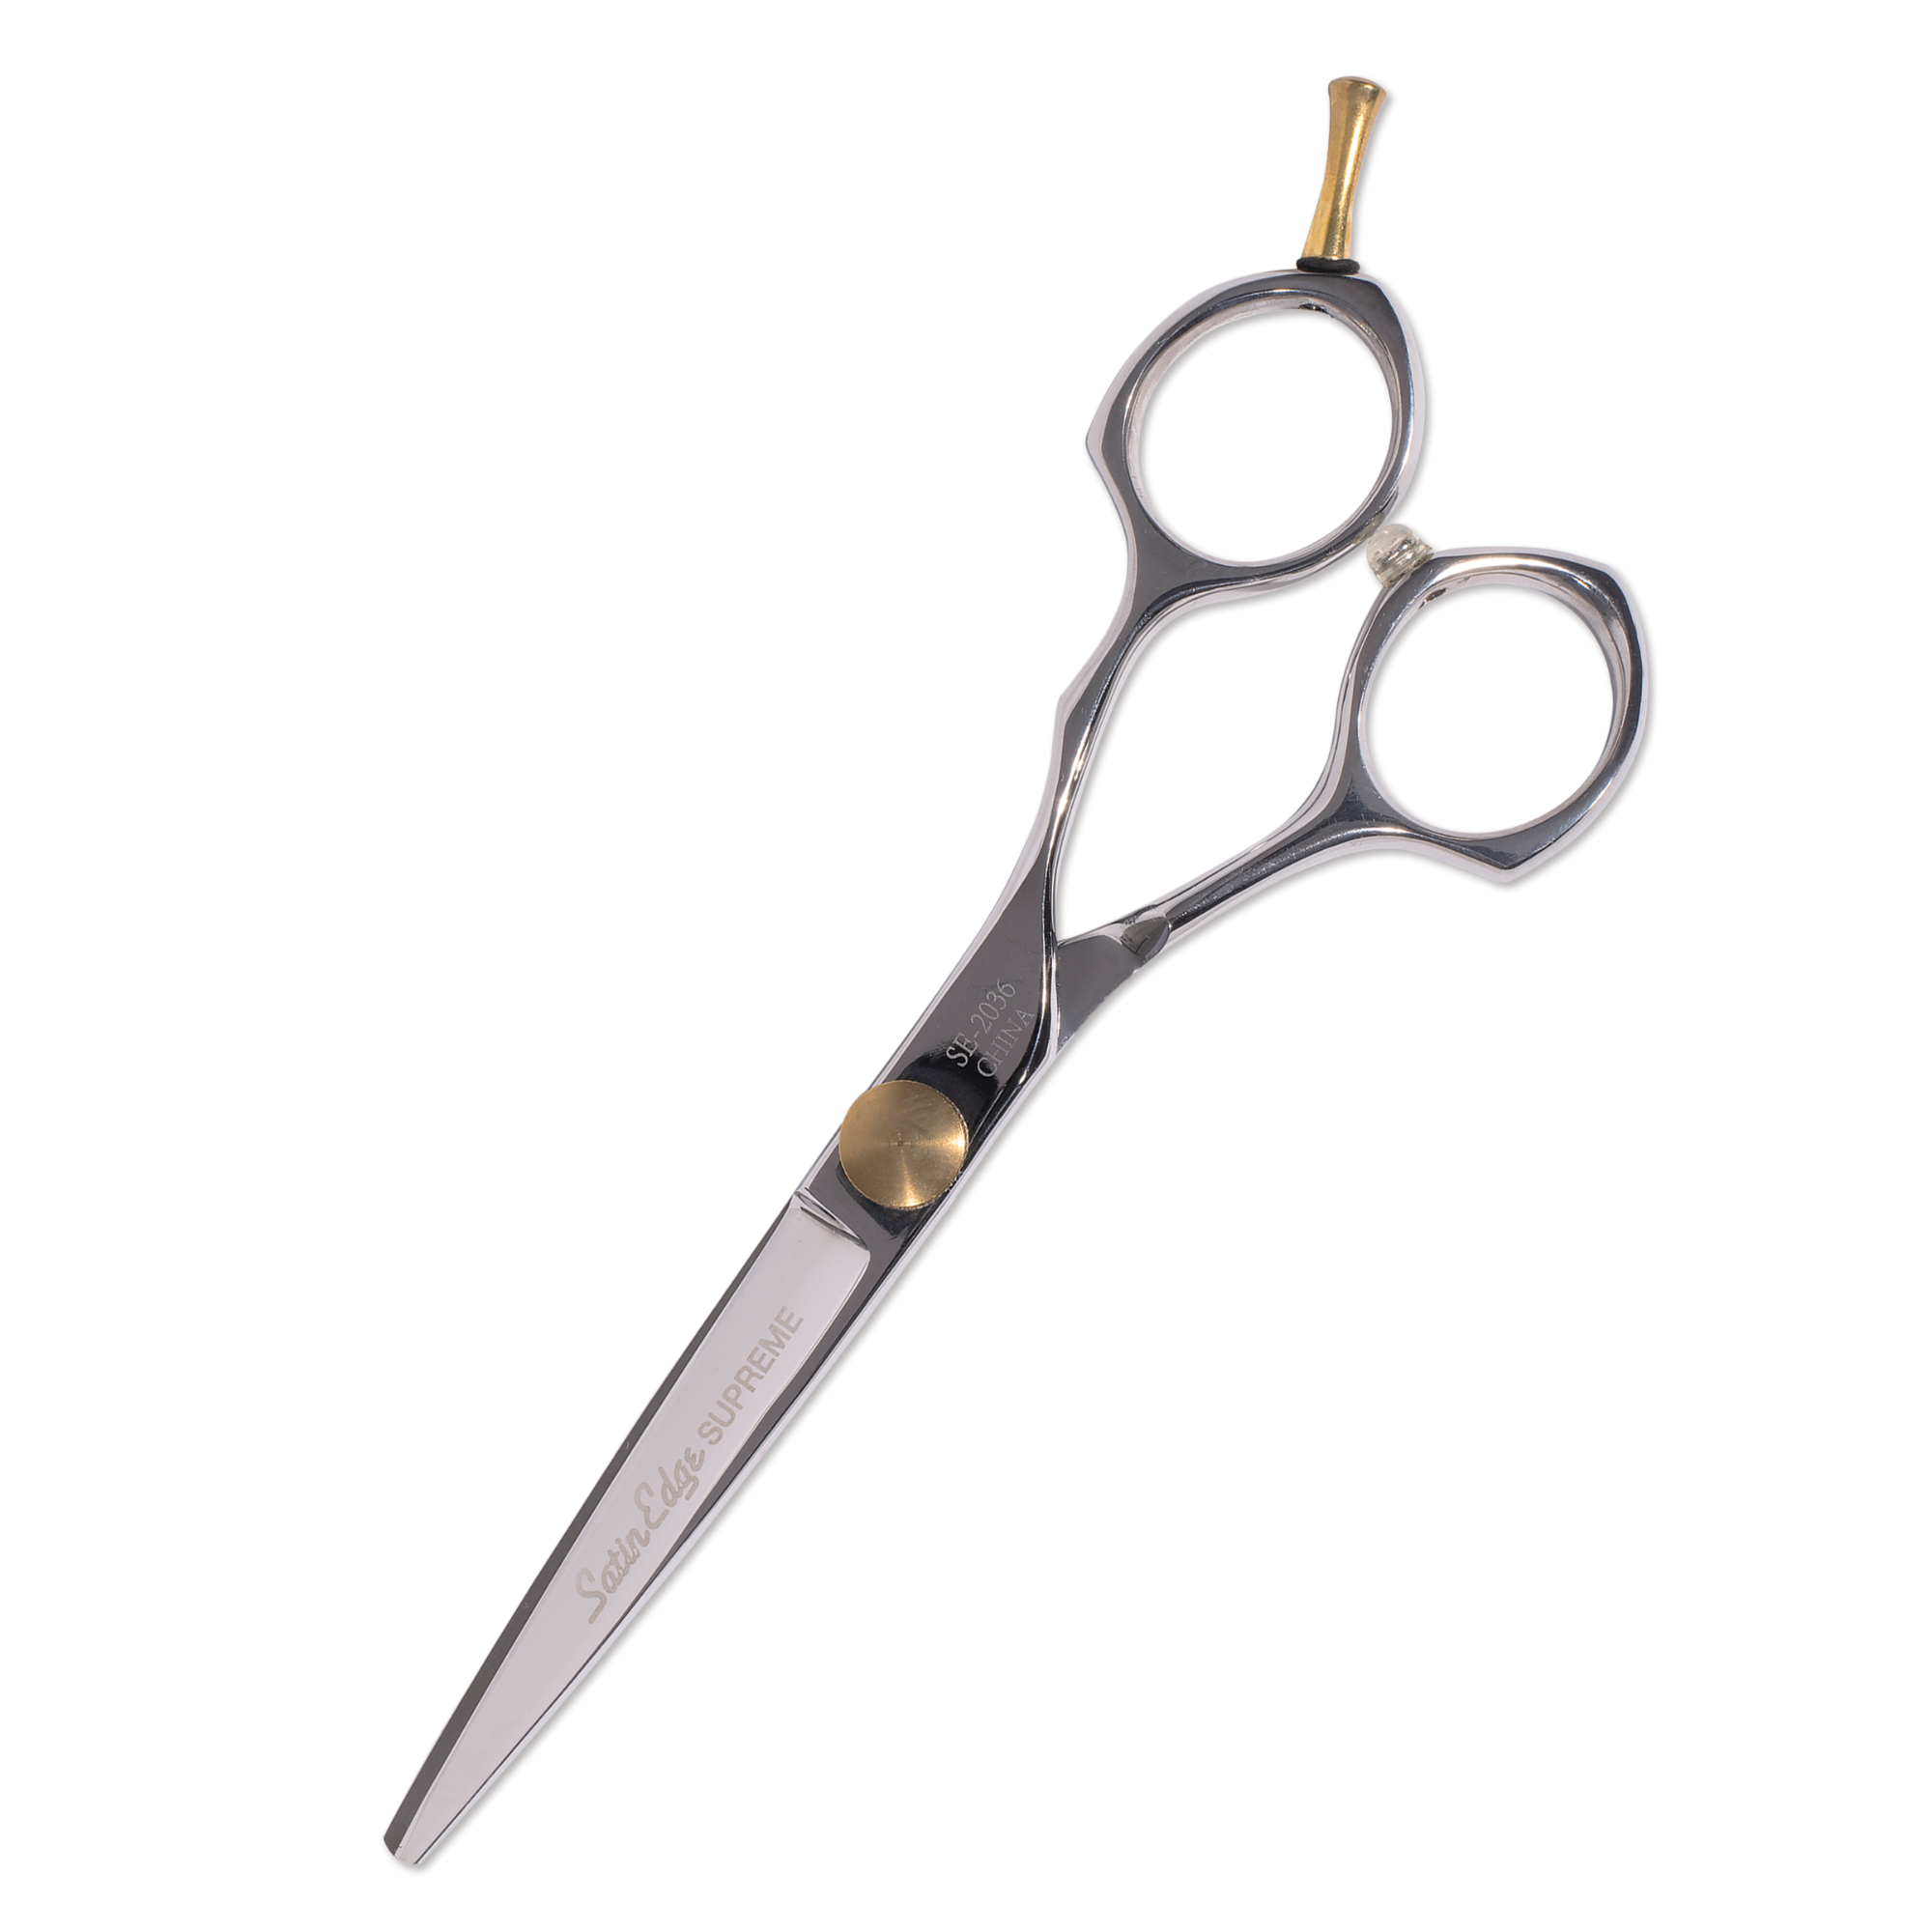 6-1/2" Supreme Stainless Steel Cutting Shear